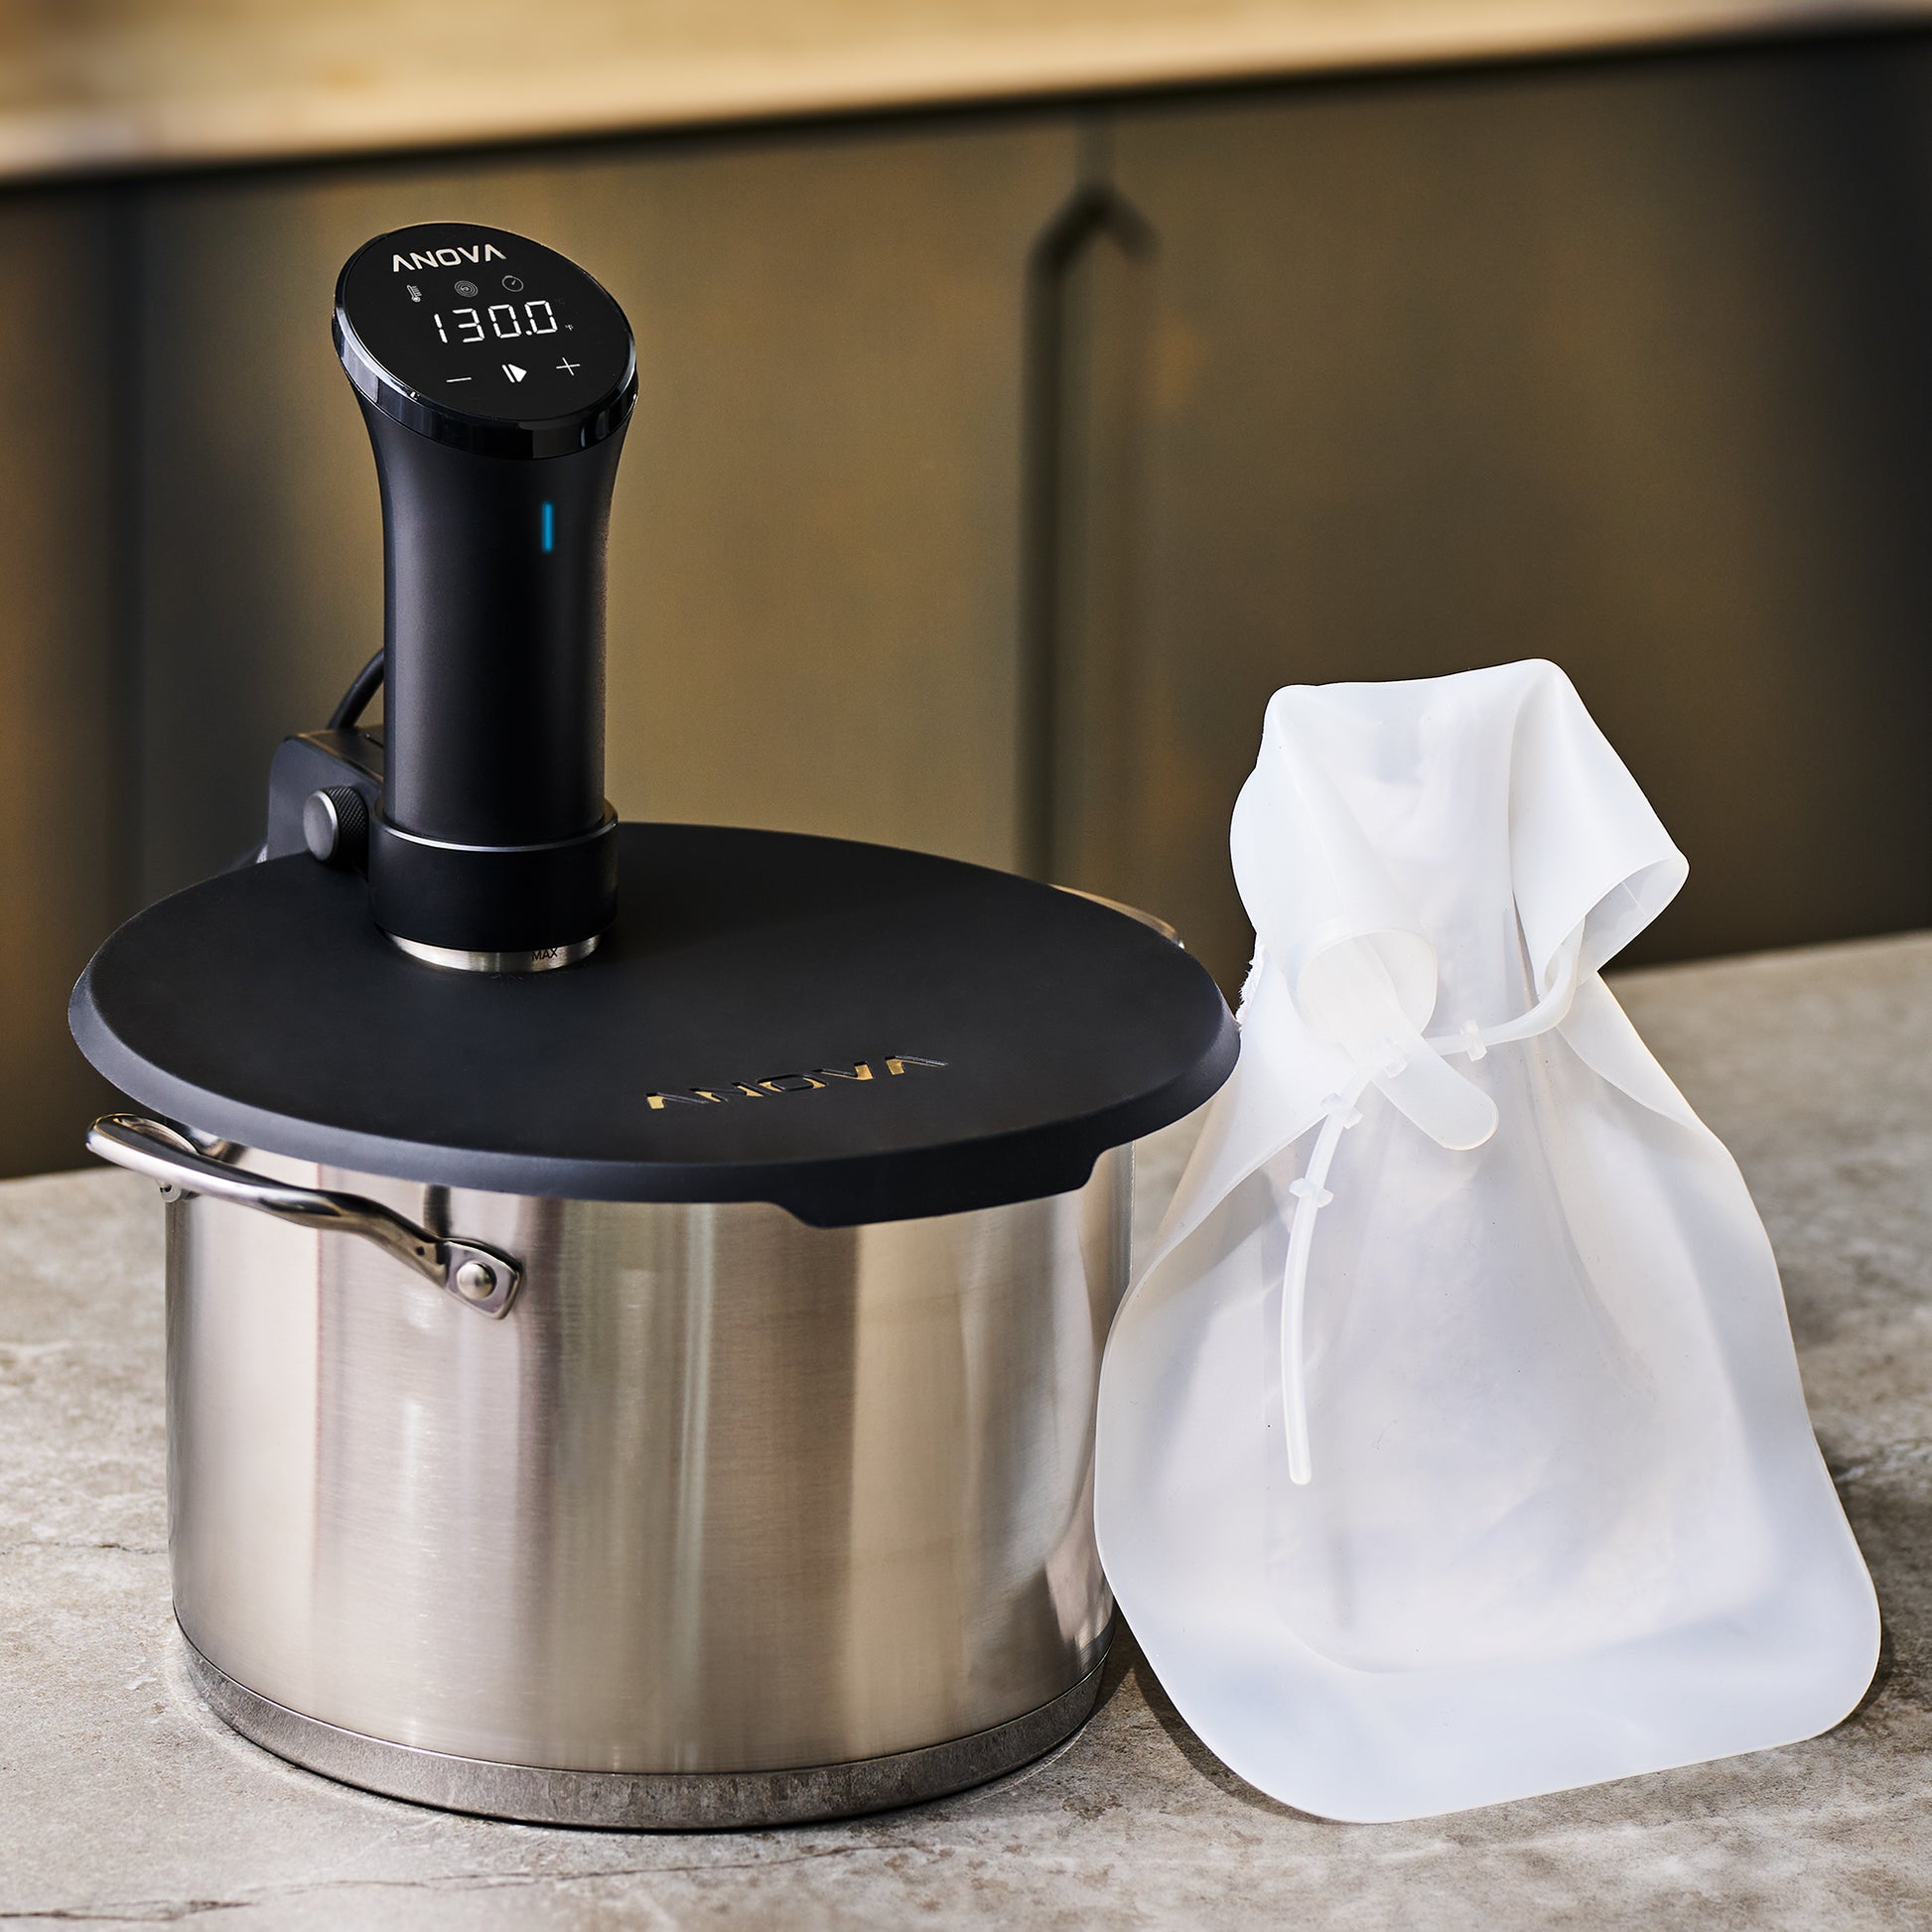 Anova Culinary Bluetooth Precision Cooker for sous-vide cooking